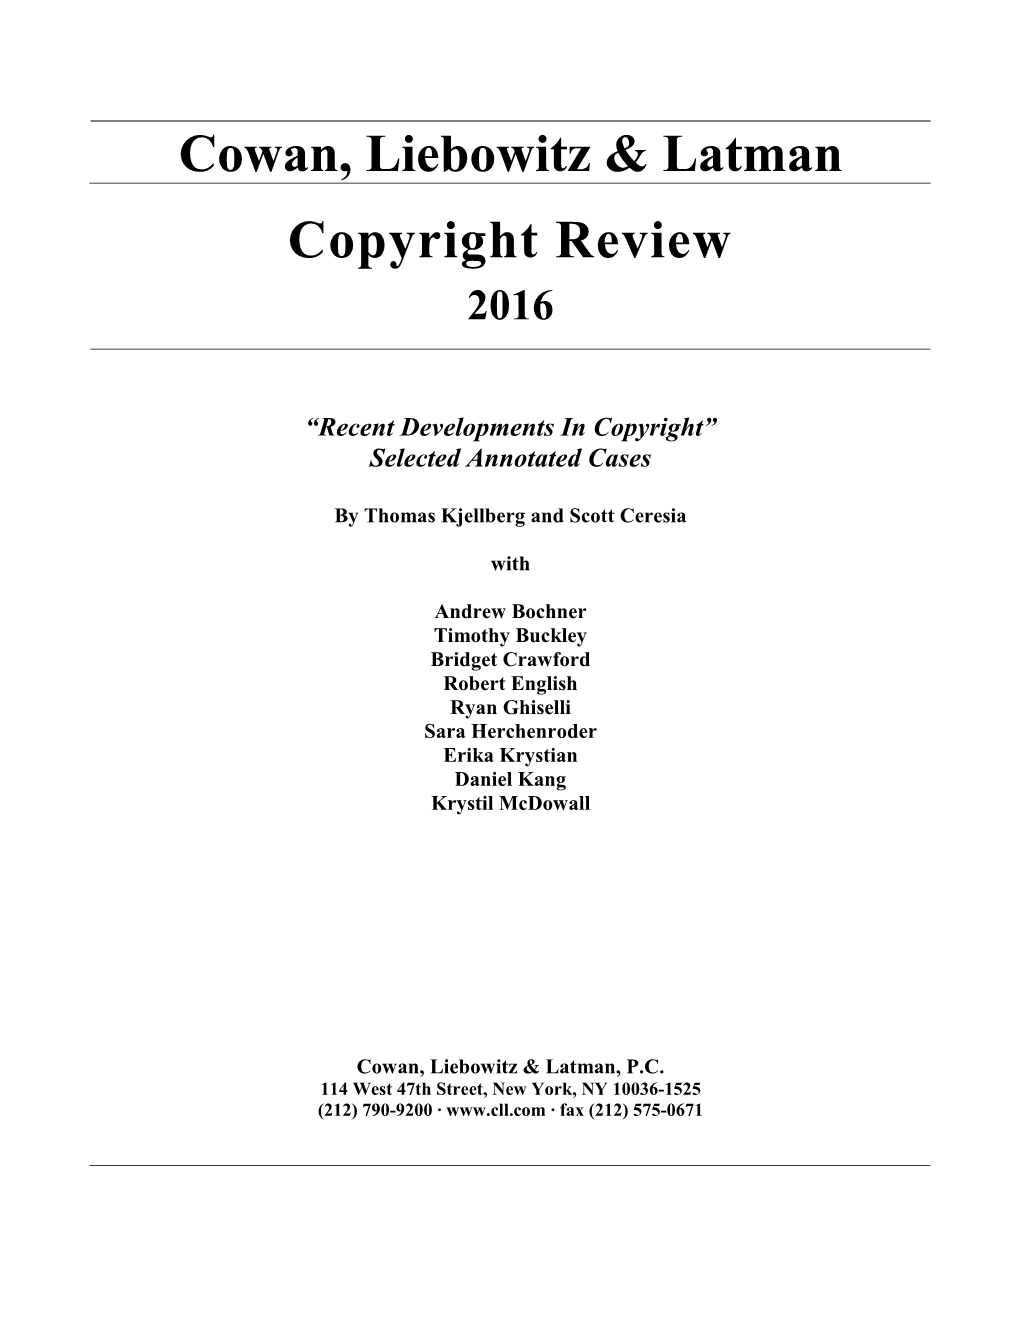 Copyright Annual Review 2016